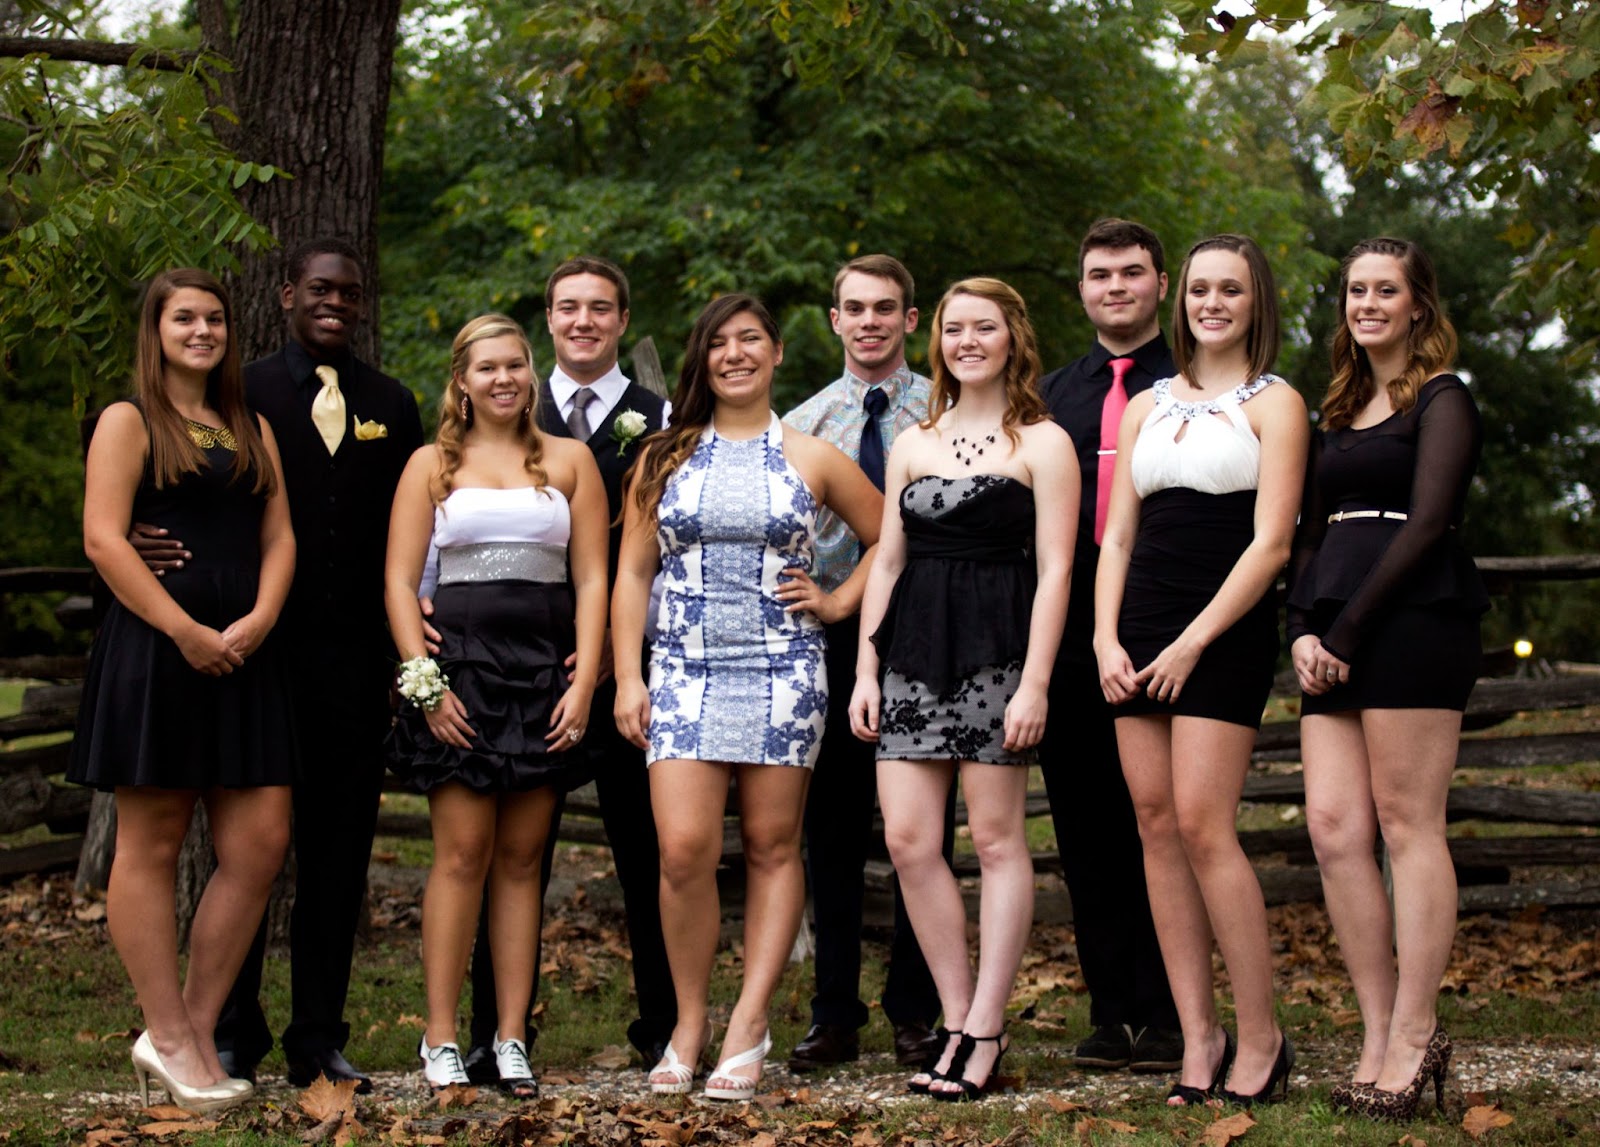 A group of students dressed formally for a High School's Homecoming event, posing for portraits capturing the spirit of the occasion.